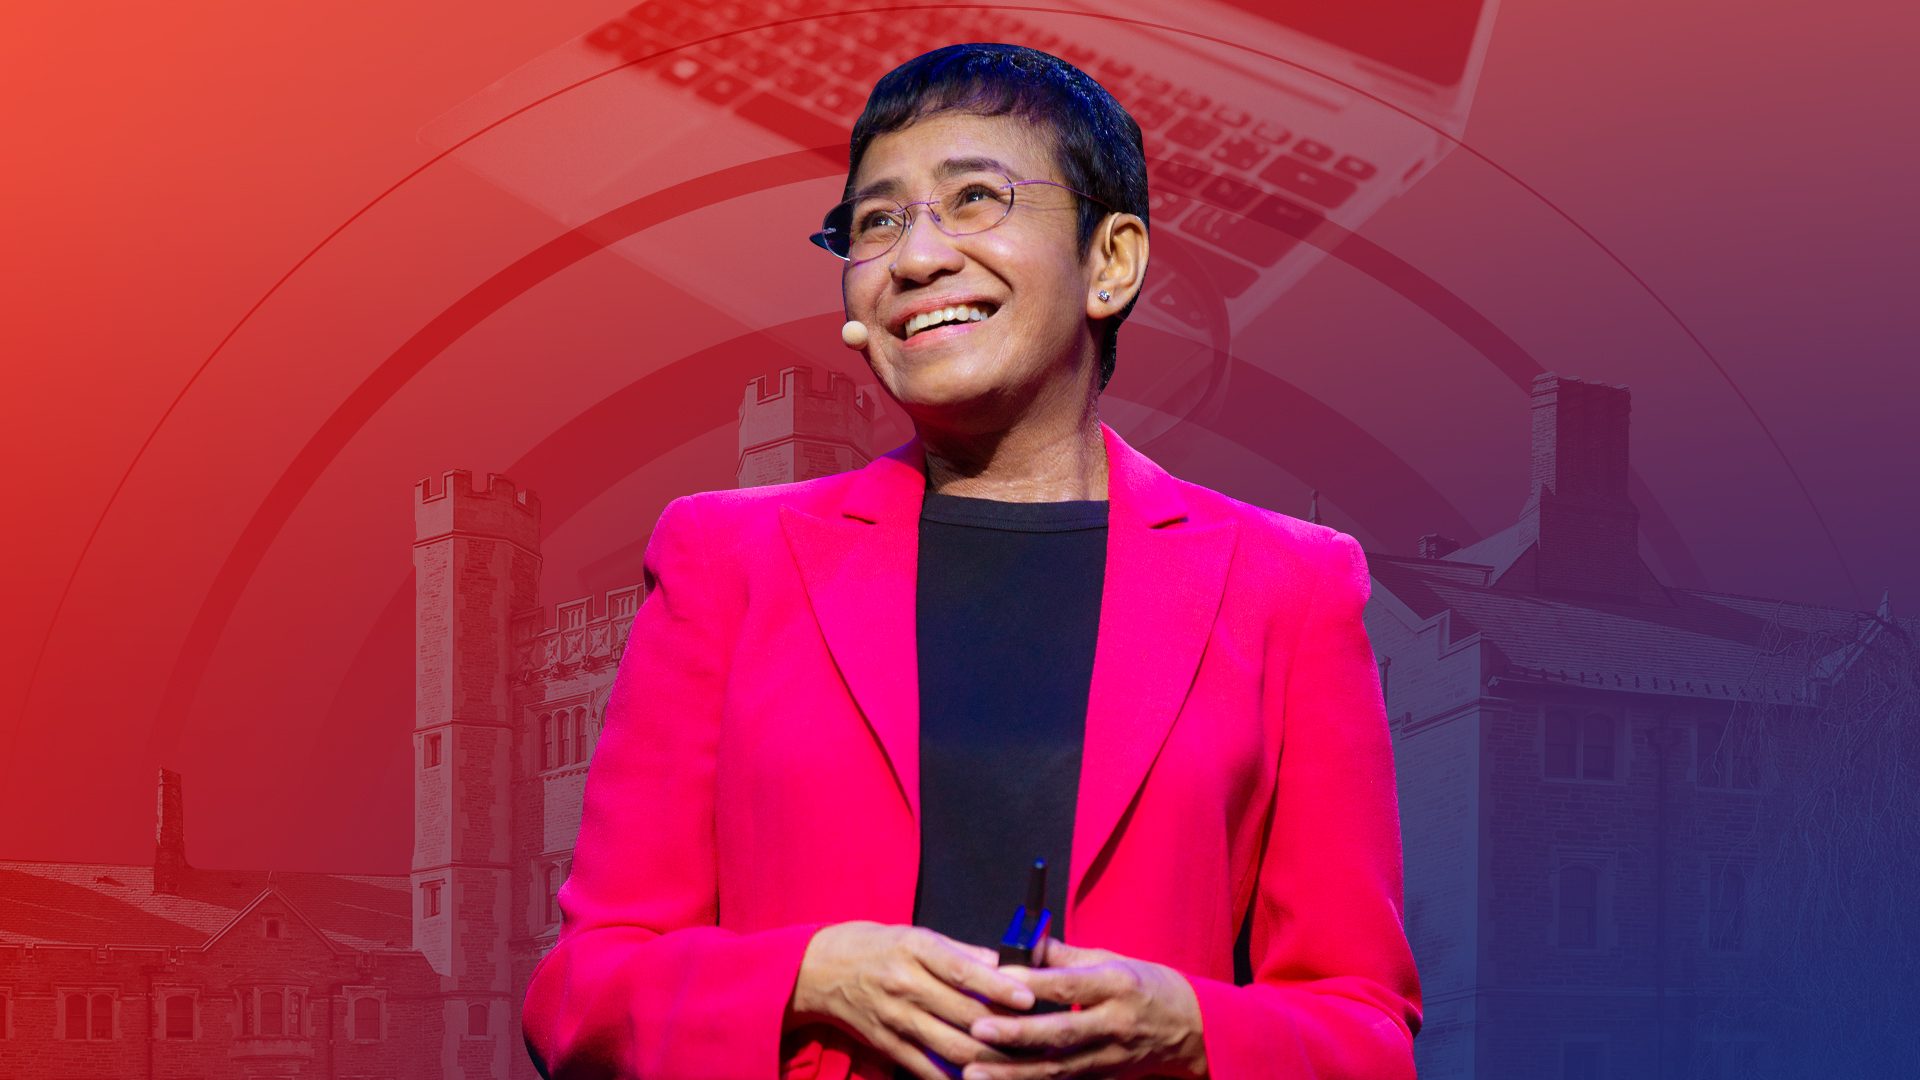 [FIRST PERSON] ‘To catch a moonbeam’: Memories of Maria Ressa in college